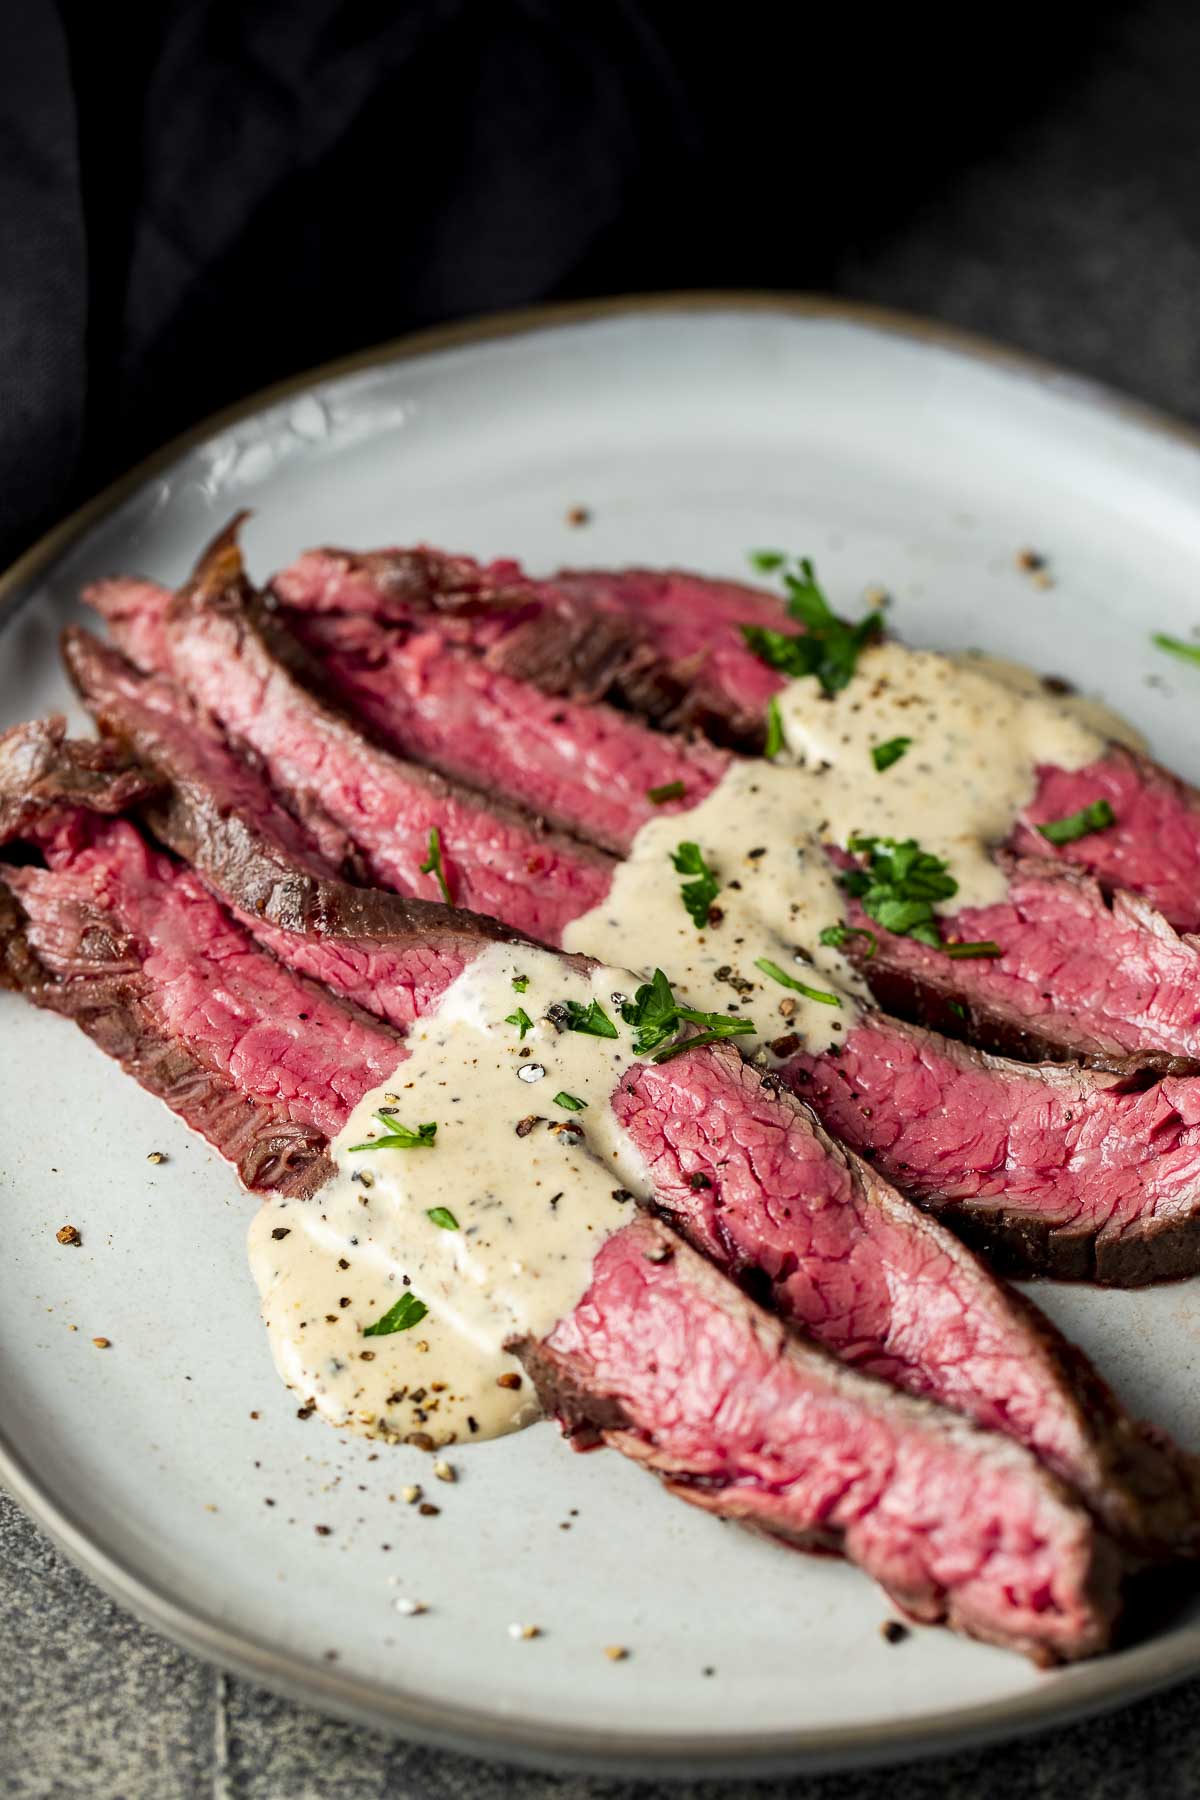 slices of medium rare beef on a plate with cream sauce and parsley